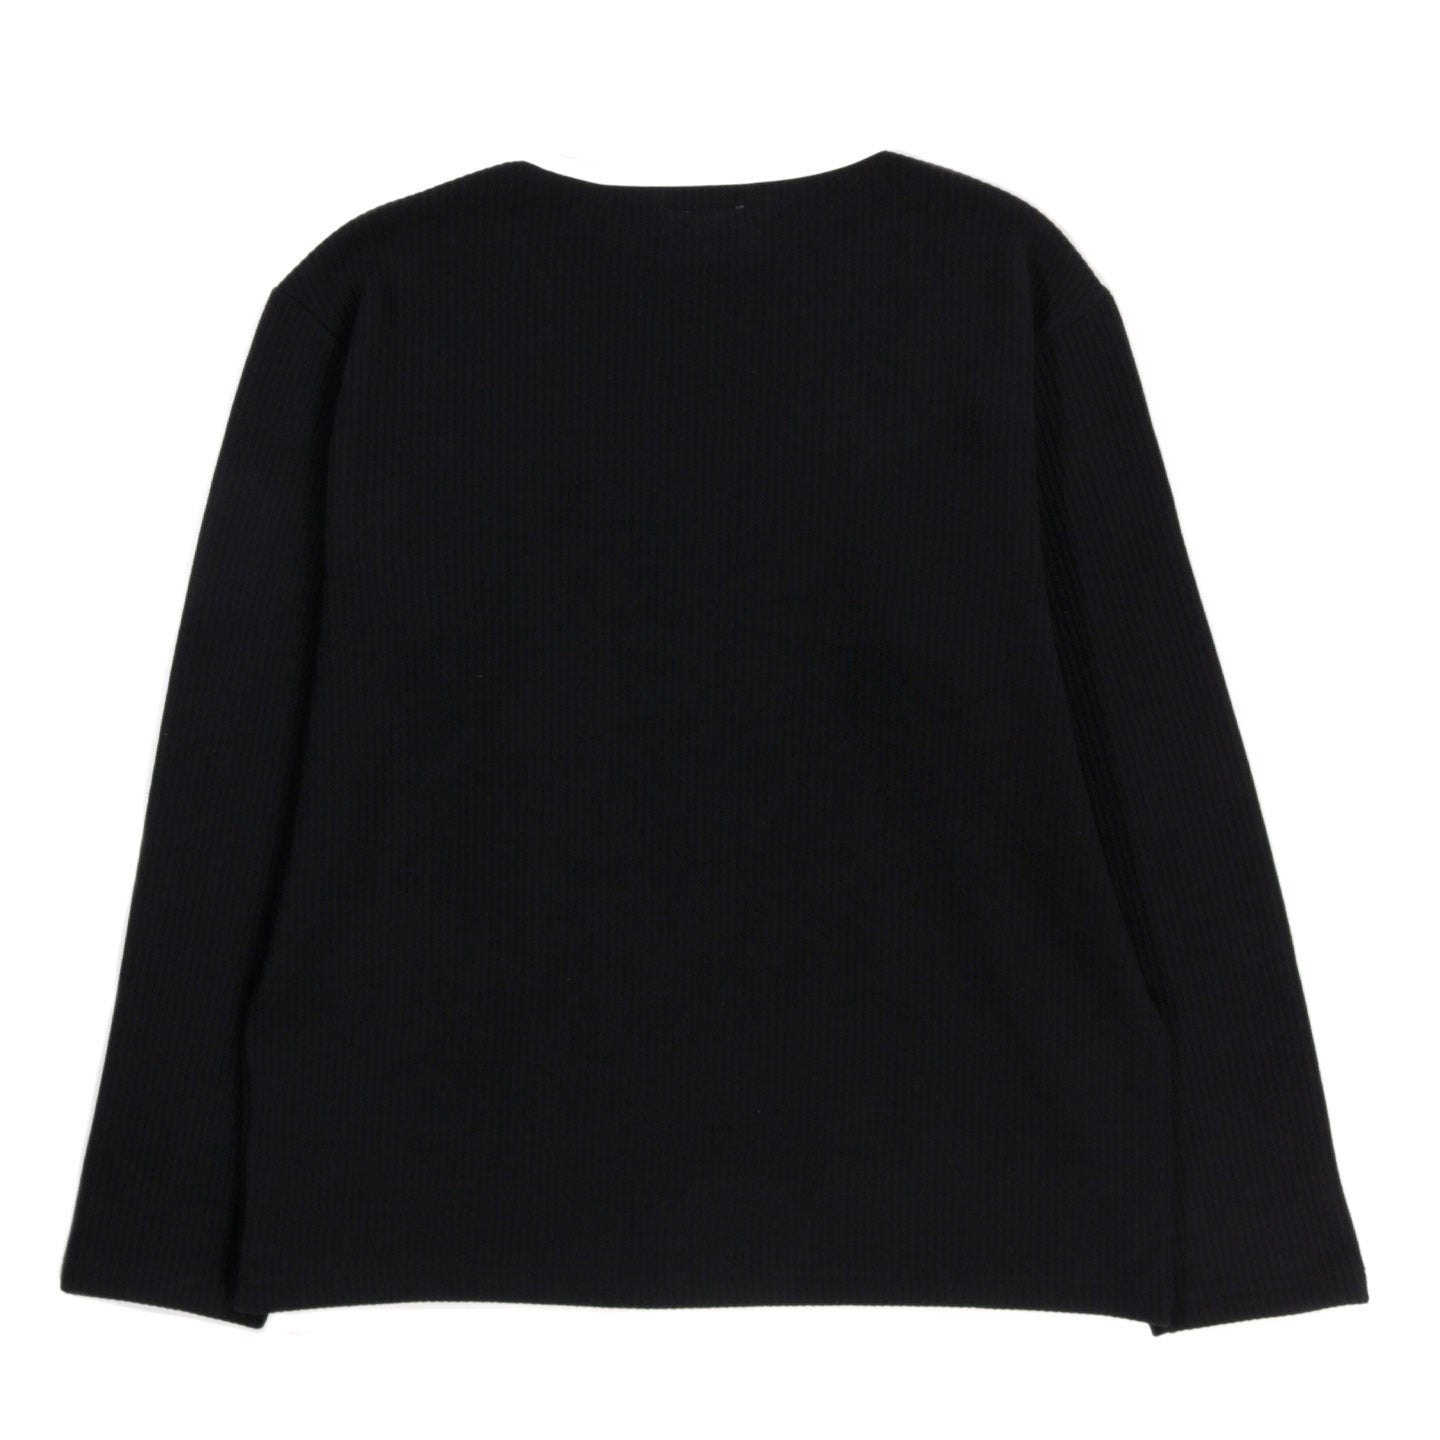 LADY WHITE CO. RING SWEATER BLACK